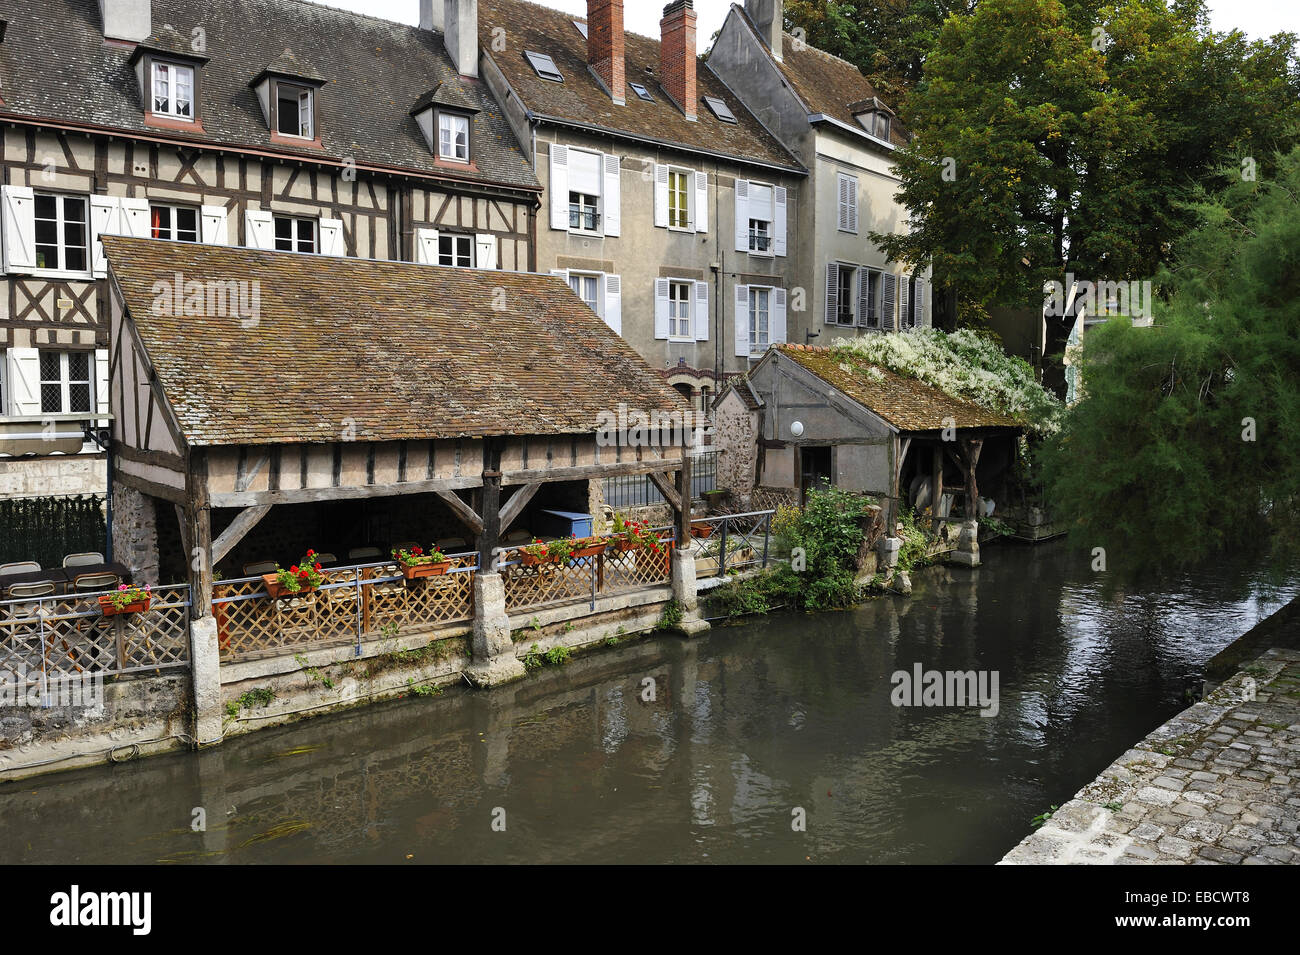 former wash house on Eure River bank, Chartres, Eure & Loir department, region Centre, France, Europe. Stock Photo